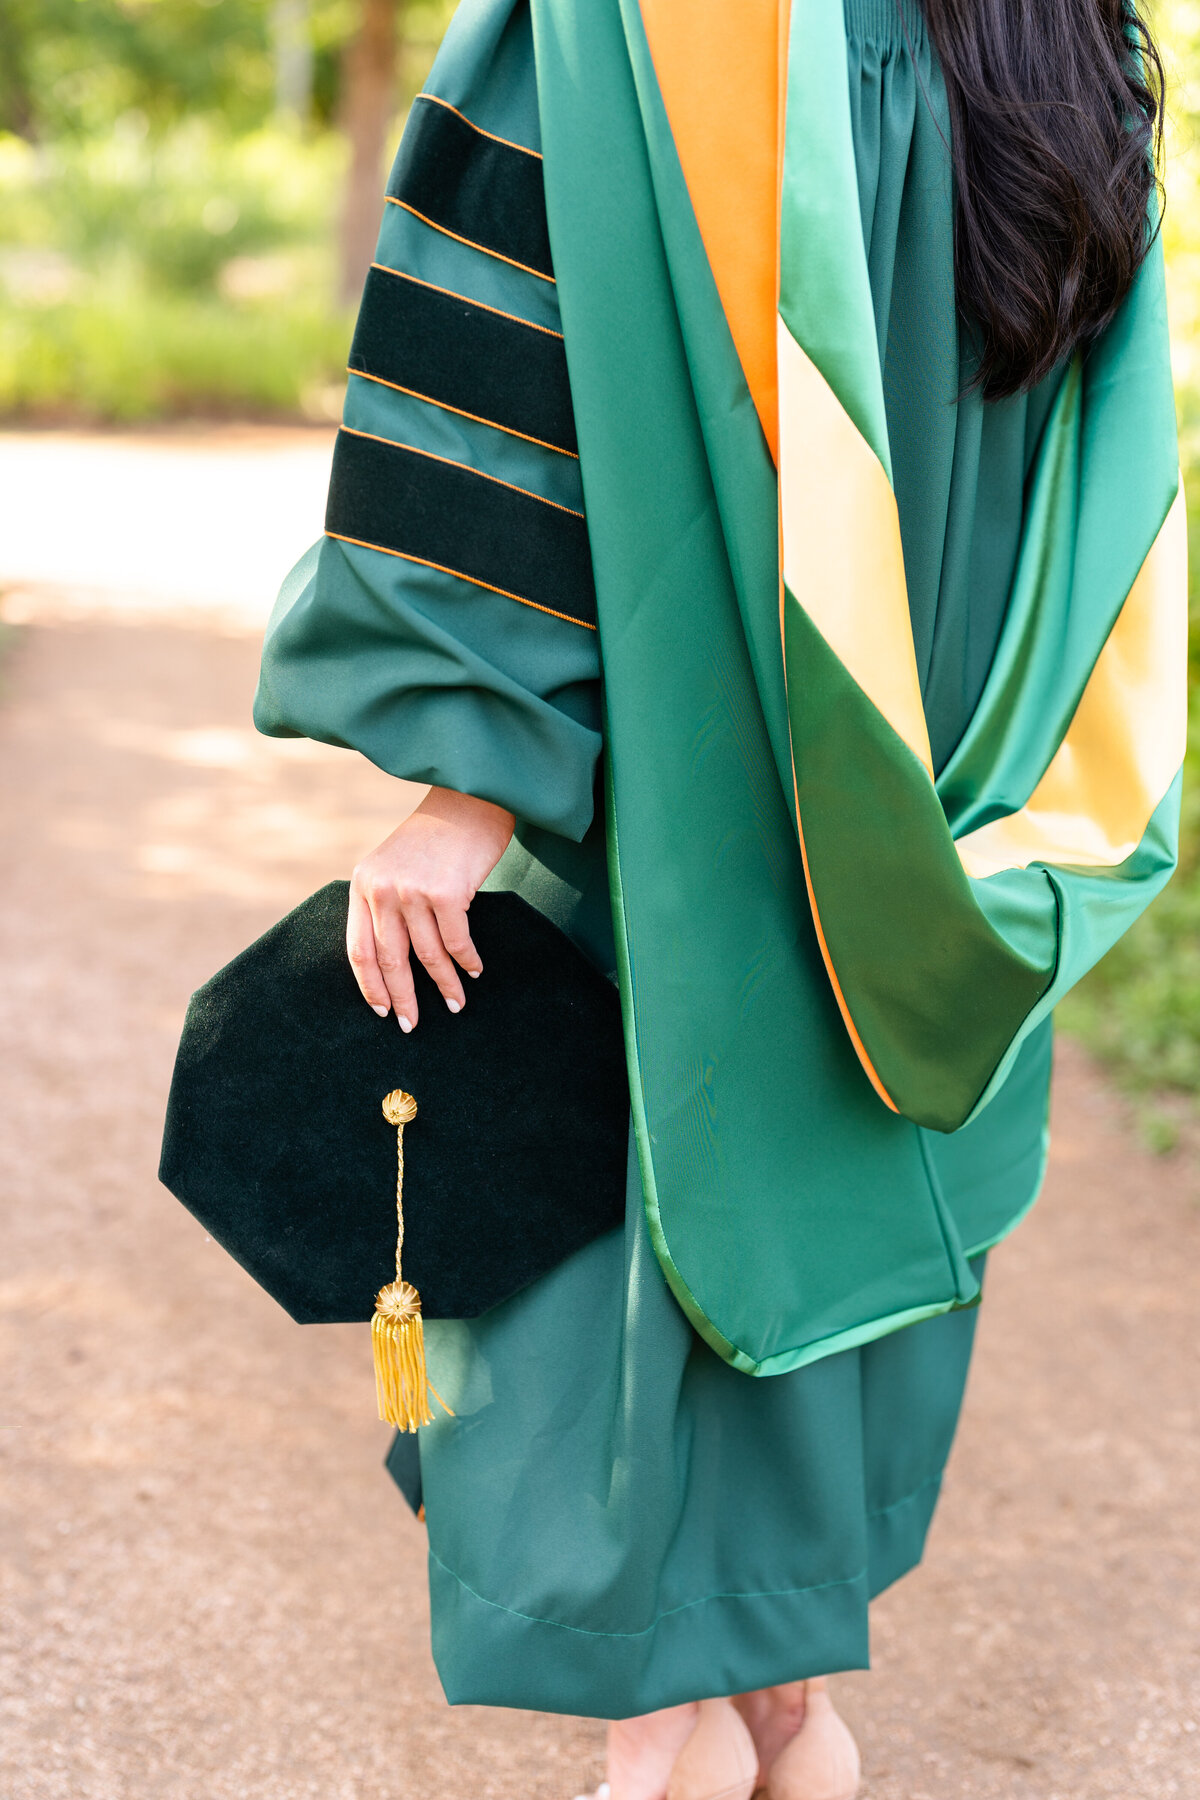 Baylor senior girl with close up of holding doctorate hat while wearing gown and hood at Houston Arboretum